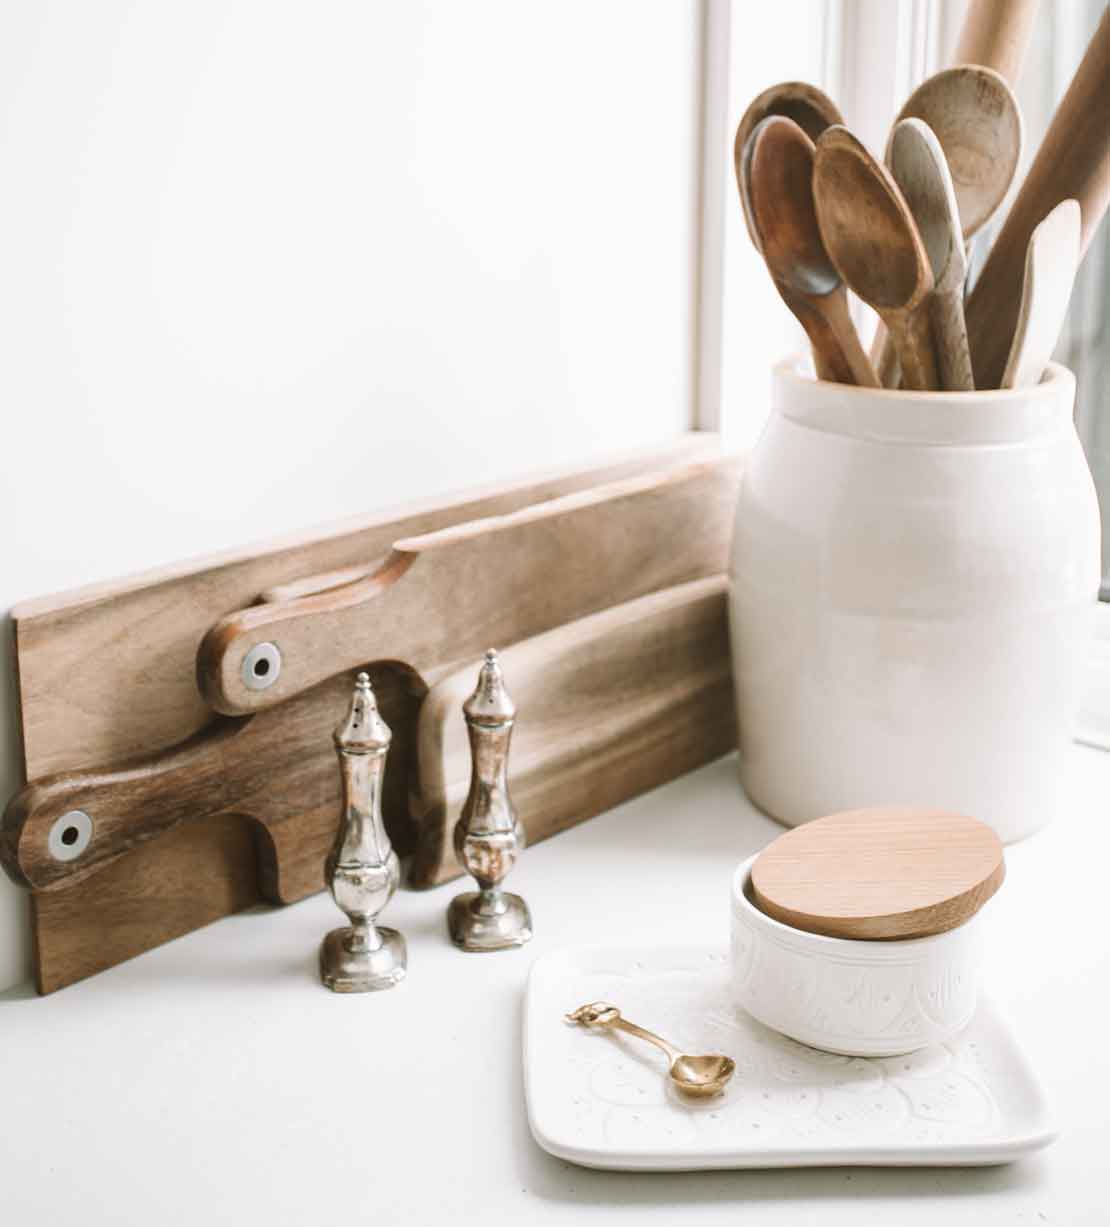 Take care of wooden kitchen utensils in 3 easy steps